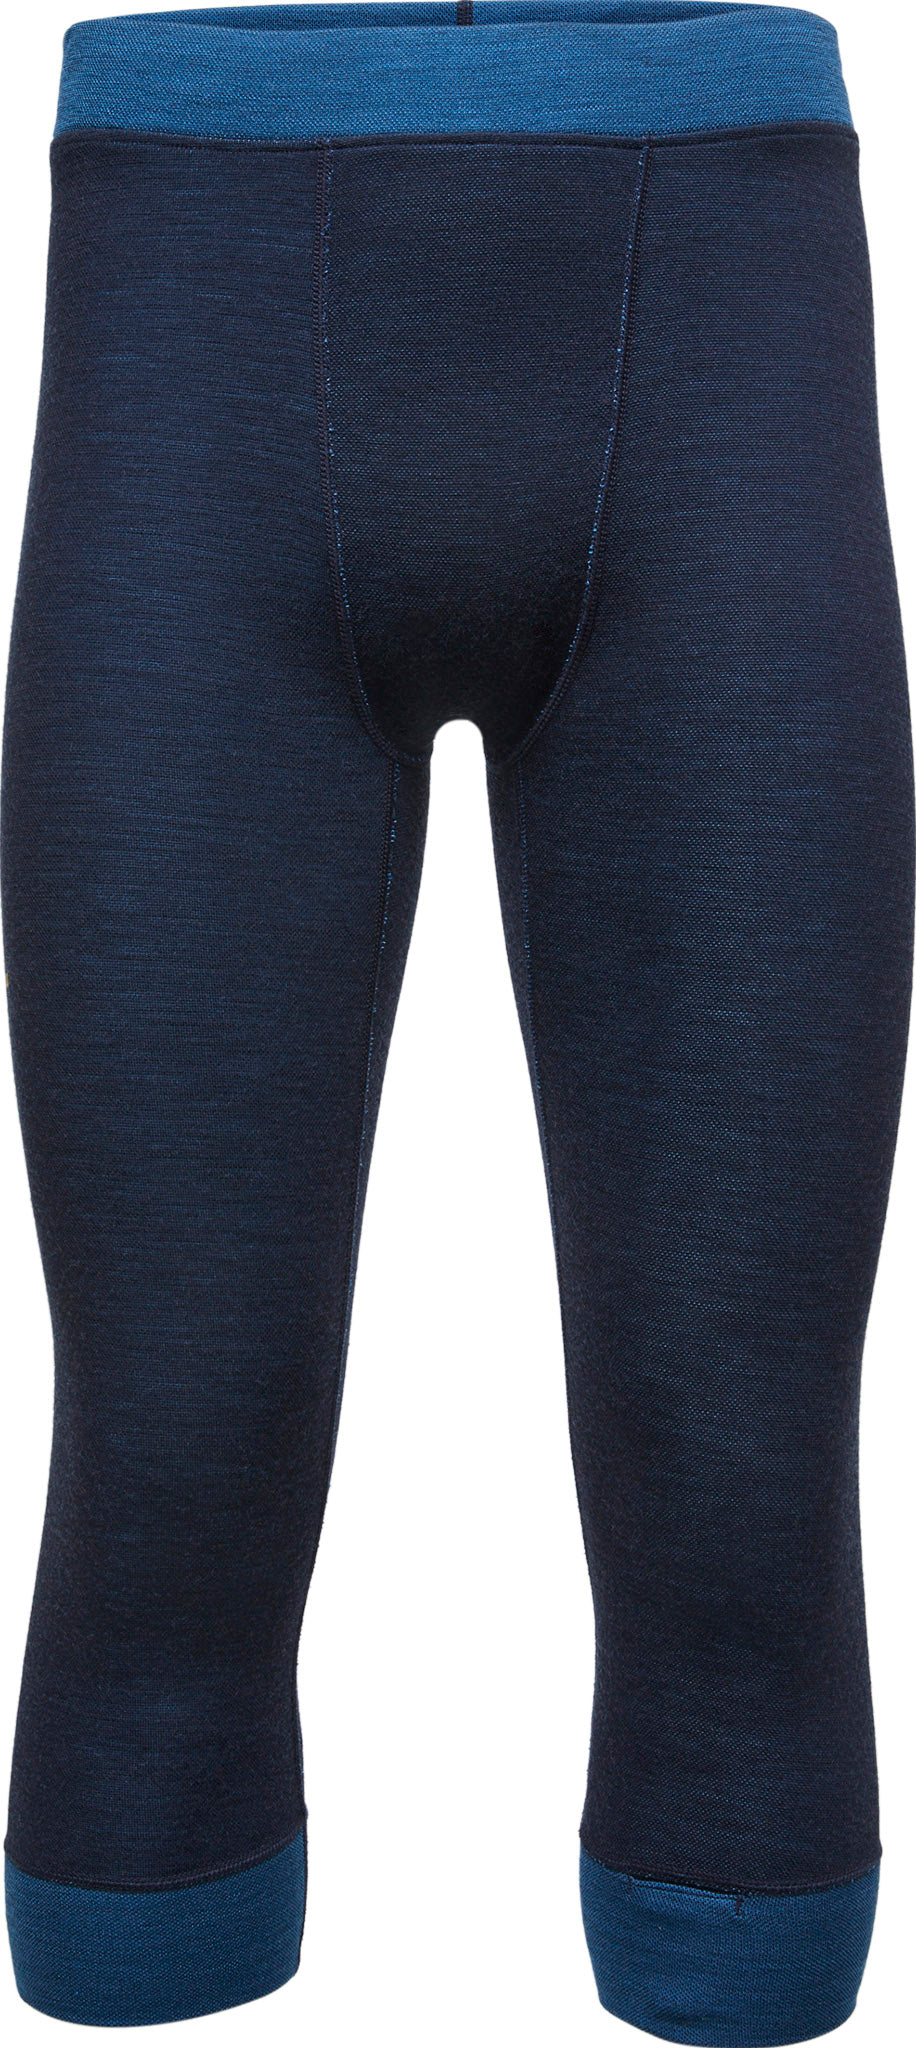 3/4 Length Go Volleyball Pants & Tights.